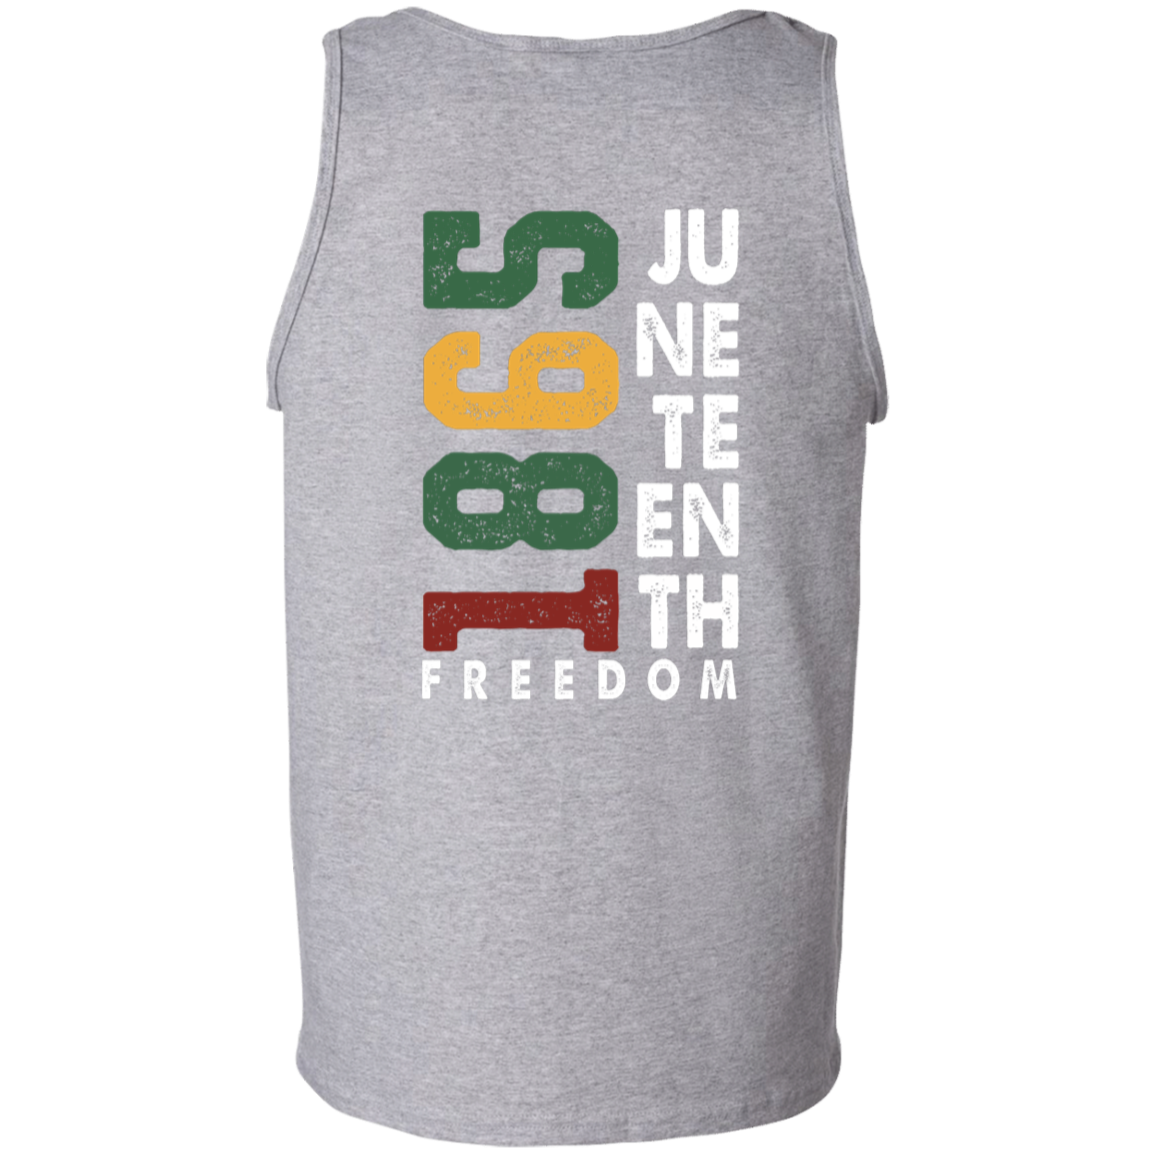 FREEDOM | JUNETEENTH COLLECTION | APPAREL